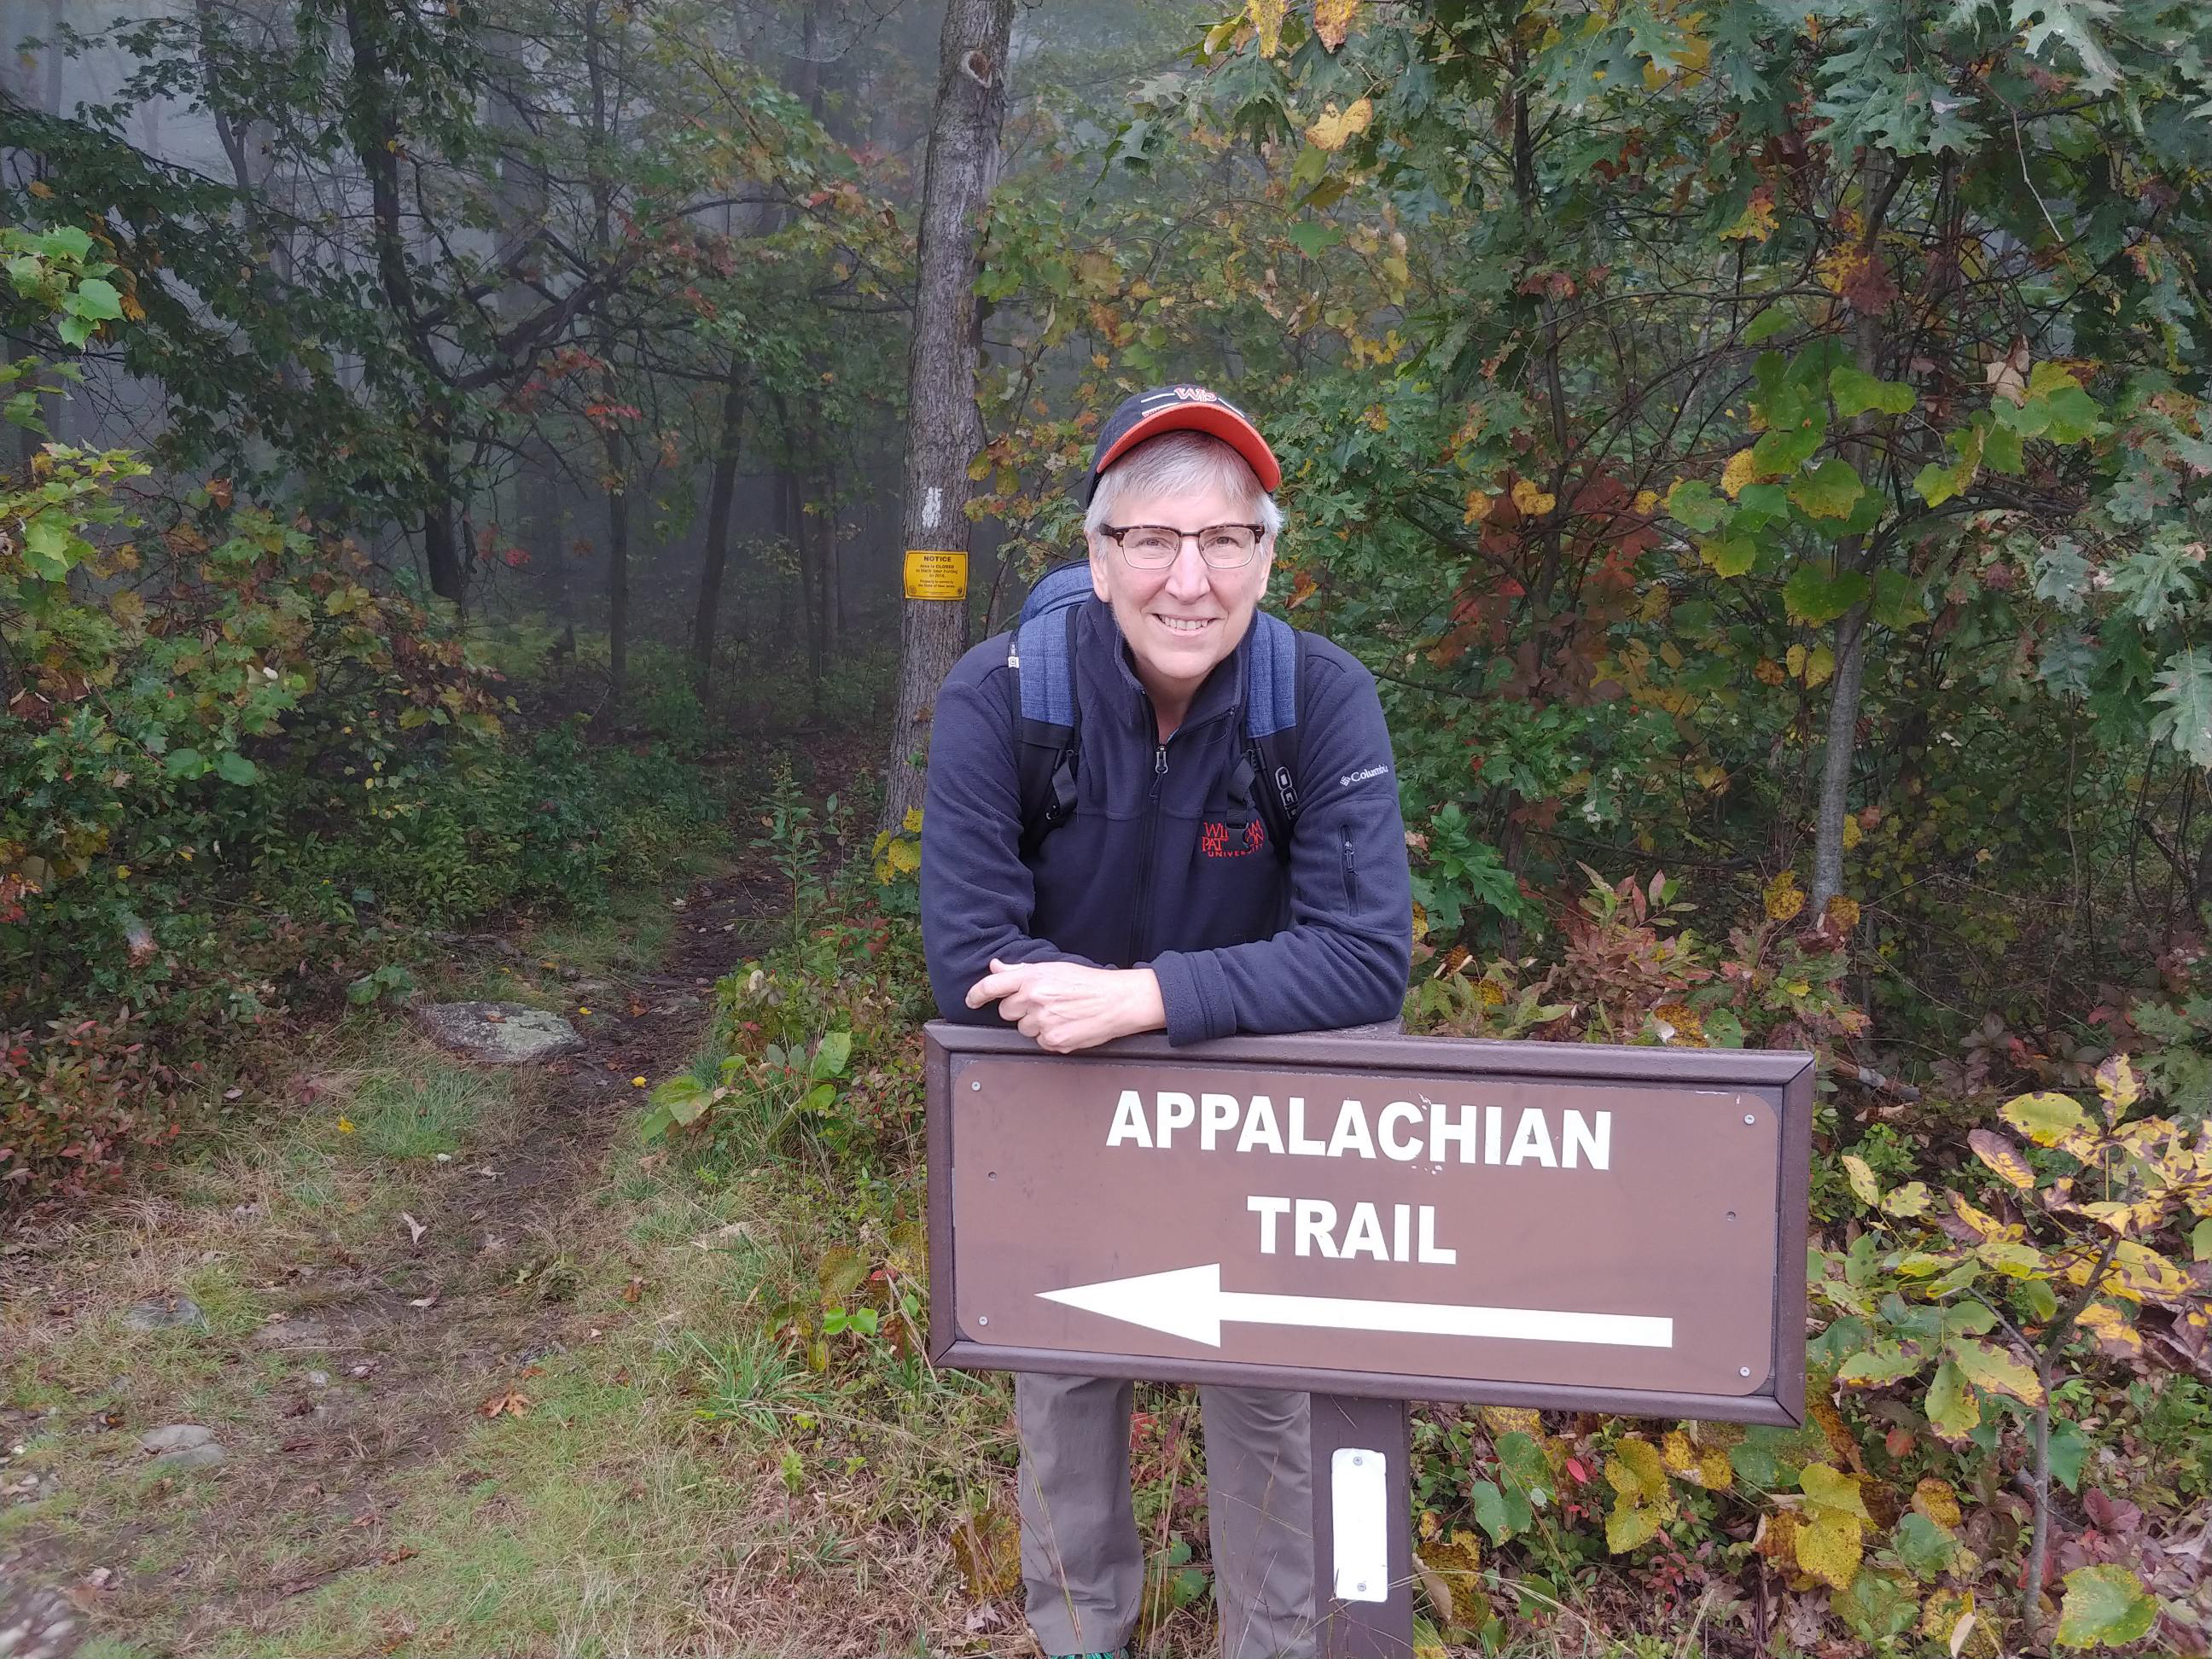 "Laura standing behind Appalachian Trail sign in the woods"